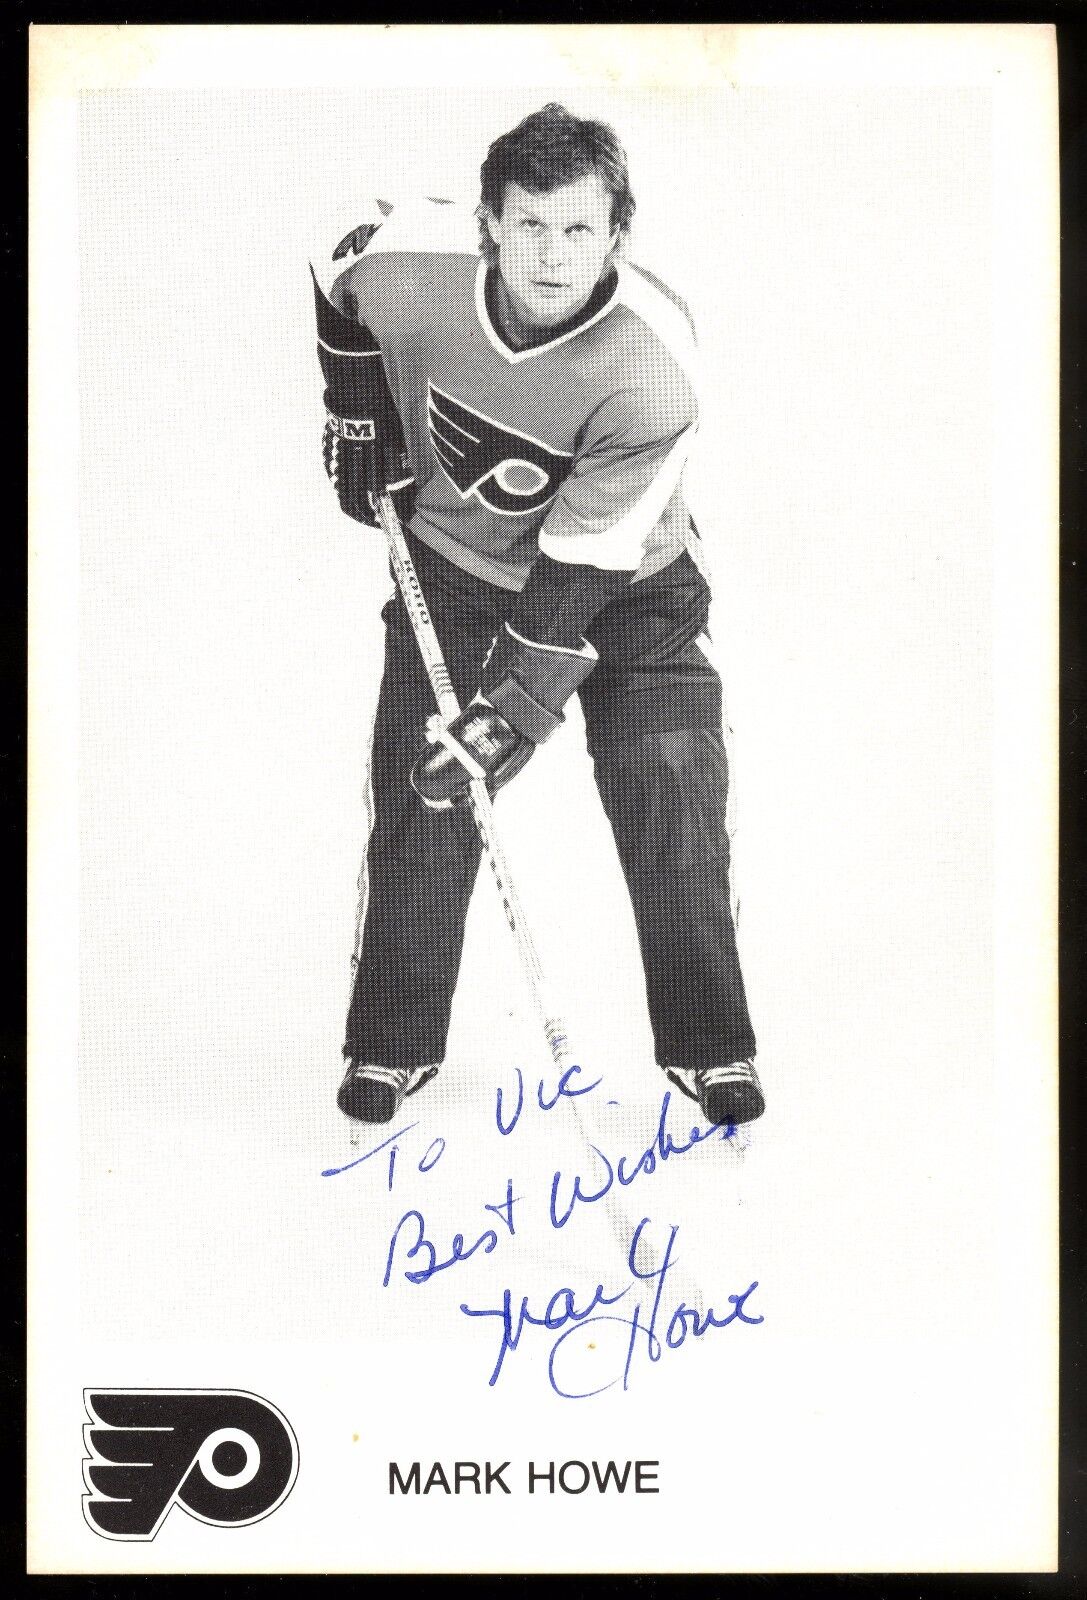 1980'S MARK HOWE AUTOGRAPH ON PROMOTIONAL PHILADELPHIA FLYERS TEAM Photo Poster painting CARD